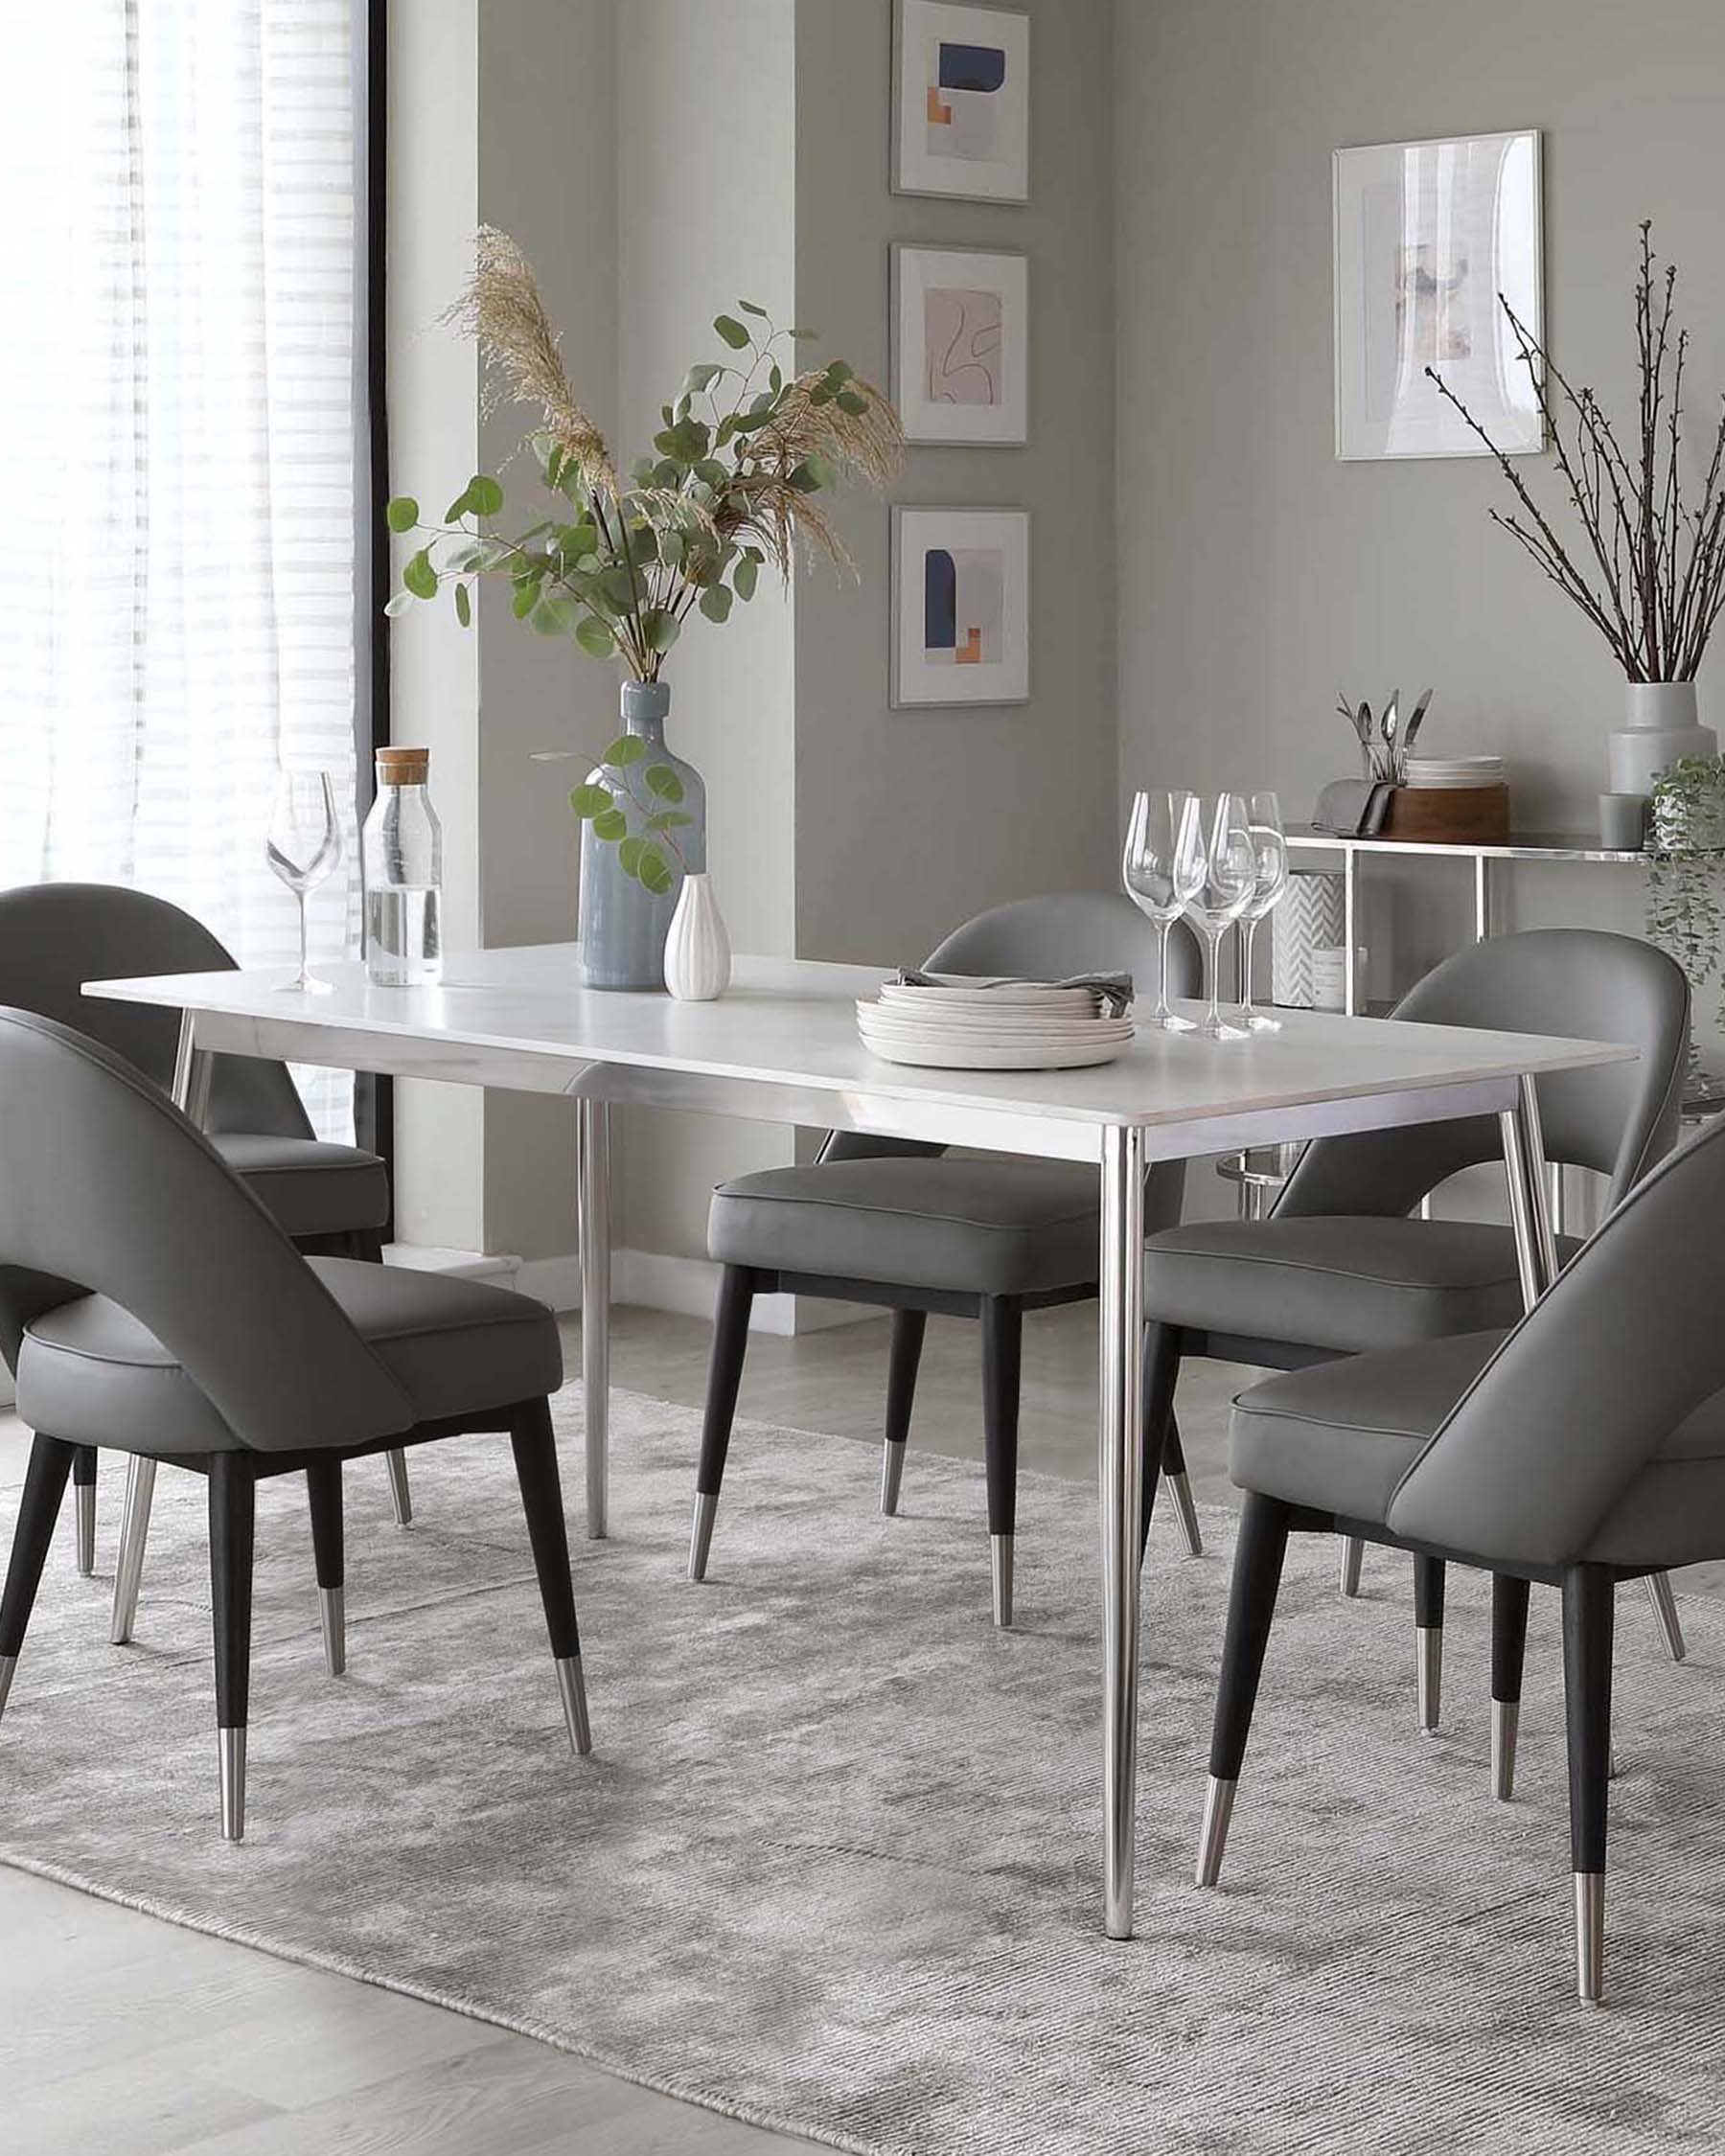 Oslo White Marbled Ceramic 6 Seater Dining Table